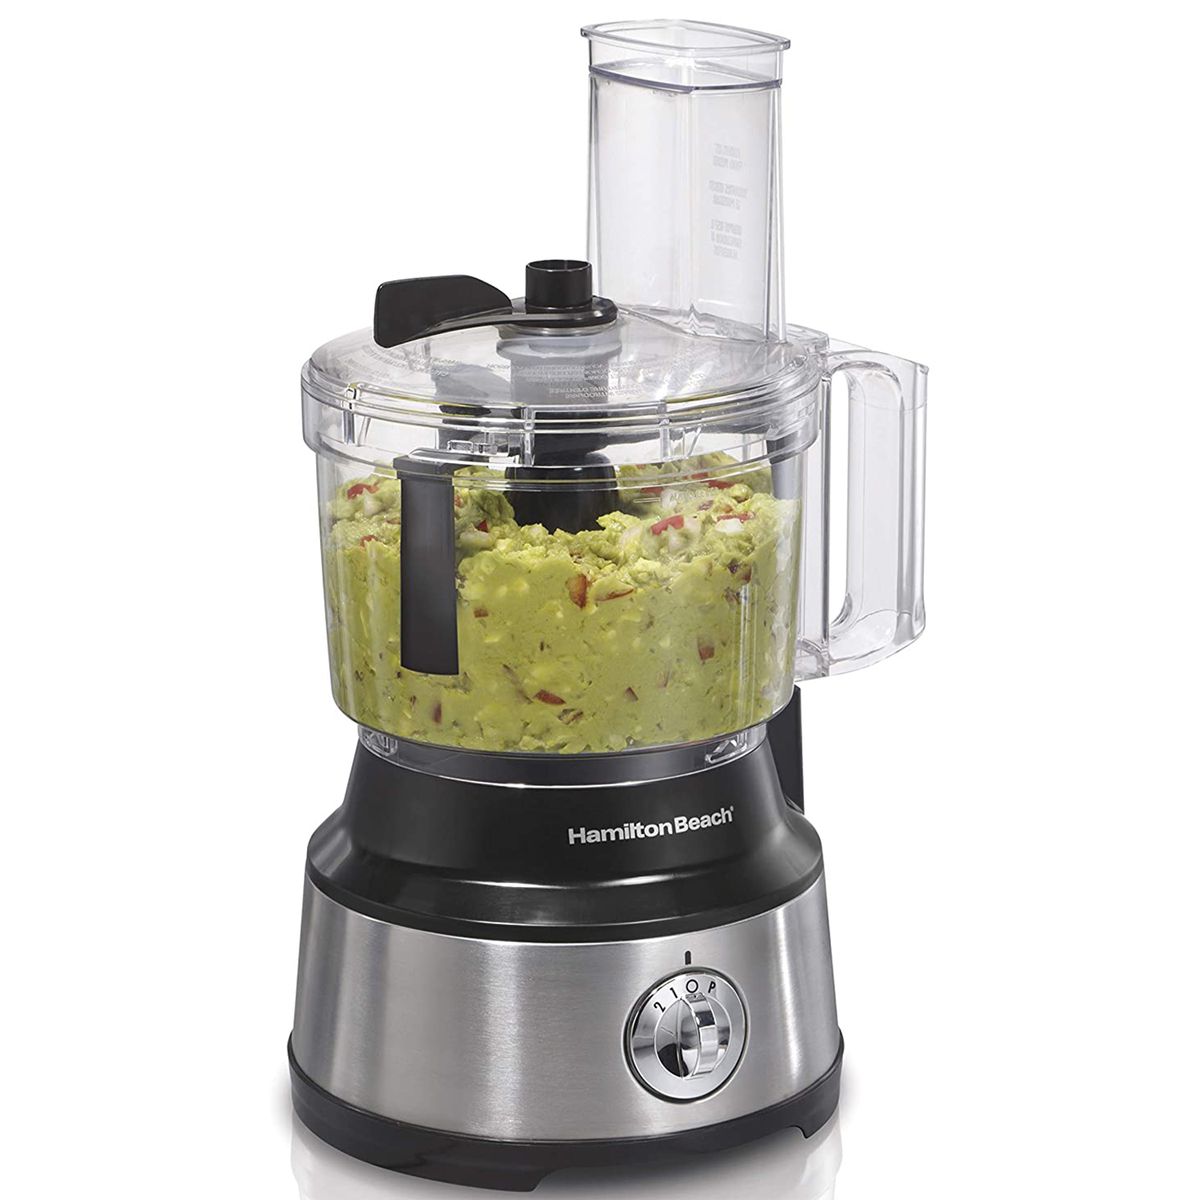 Hamilton Beach Food Processor and Vegetable Chopper for Slicing